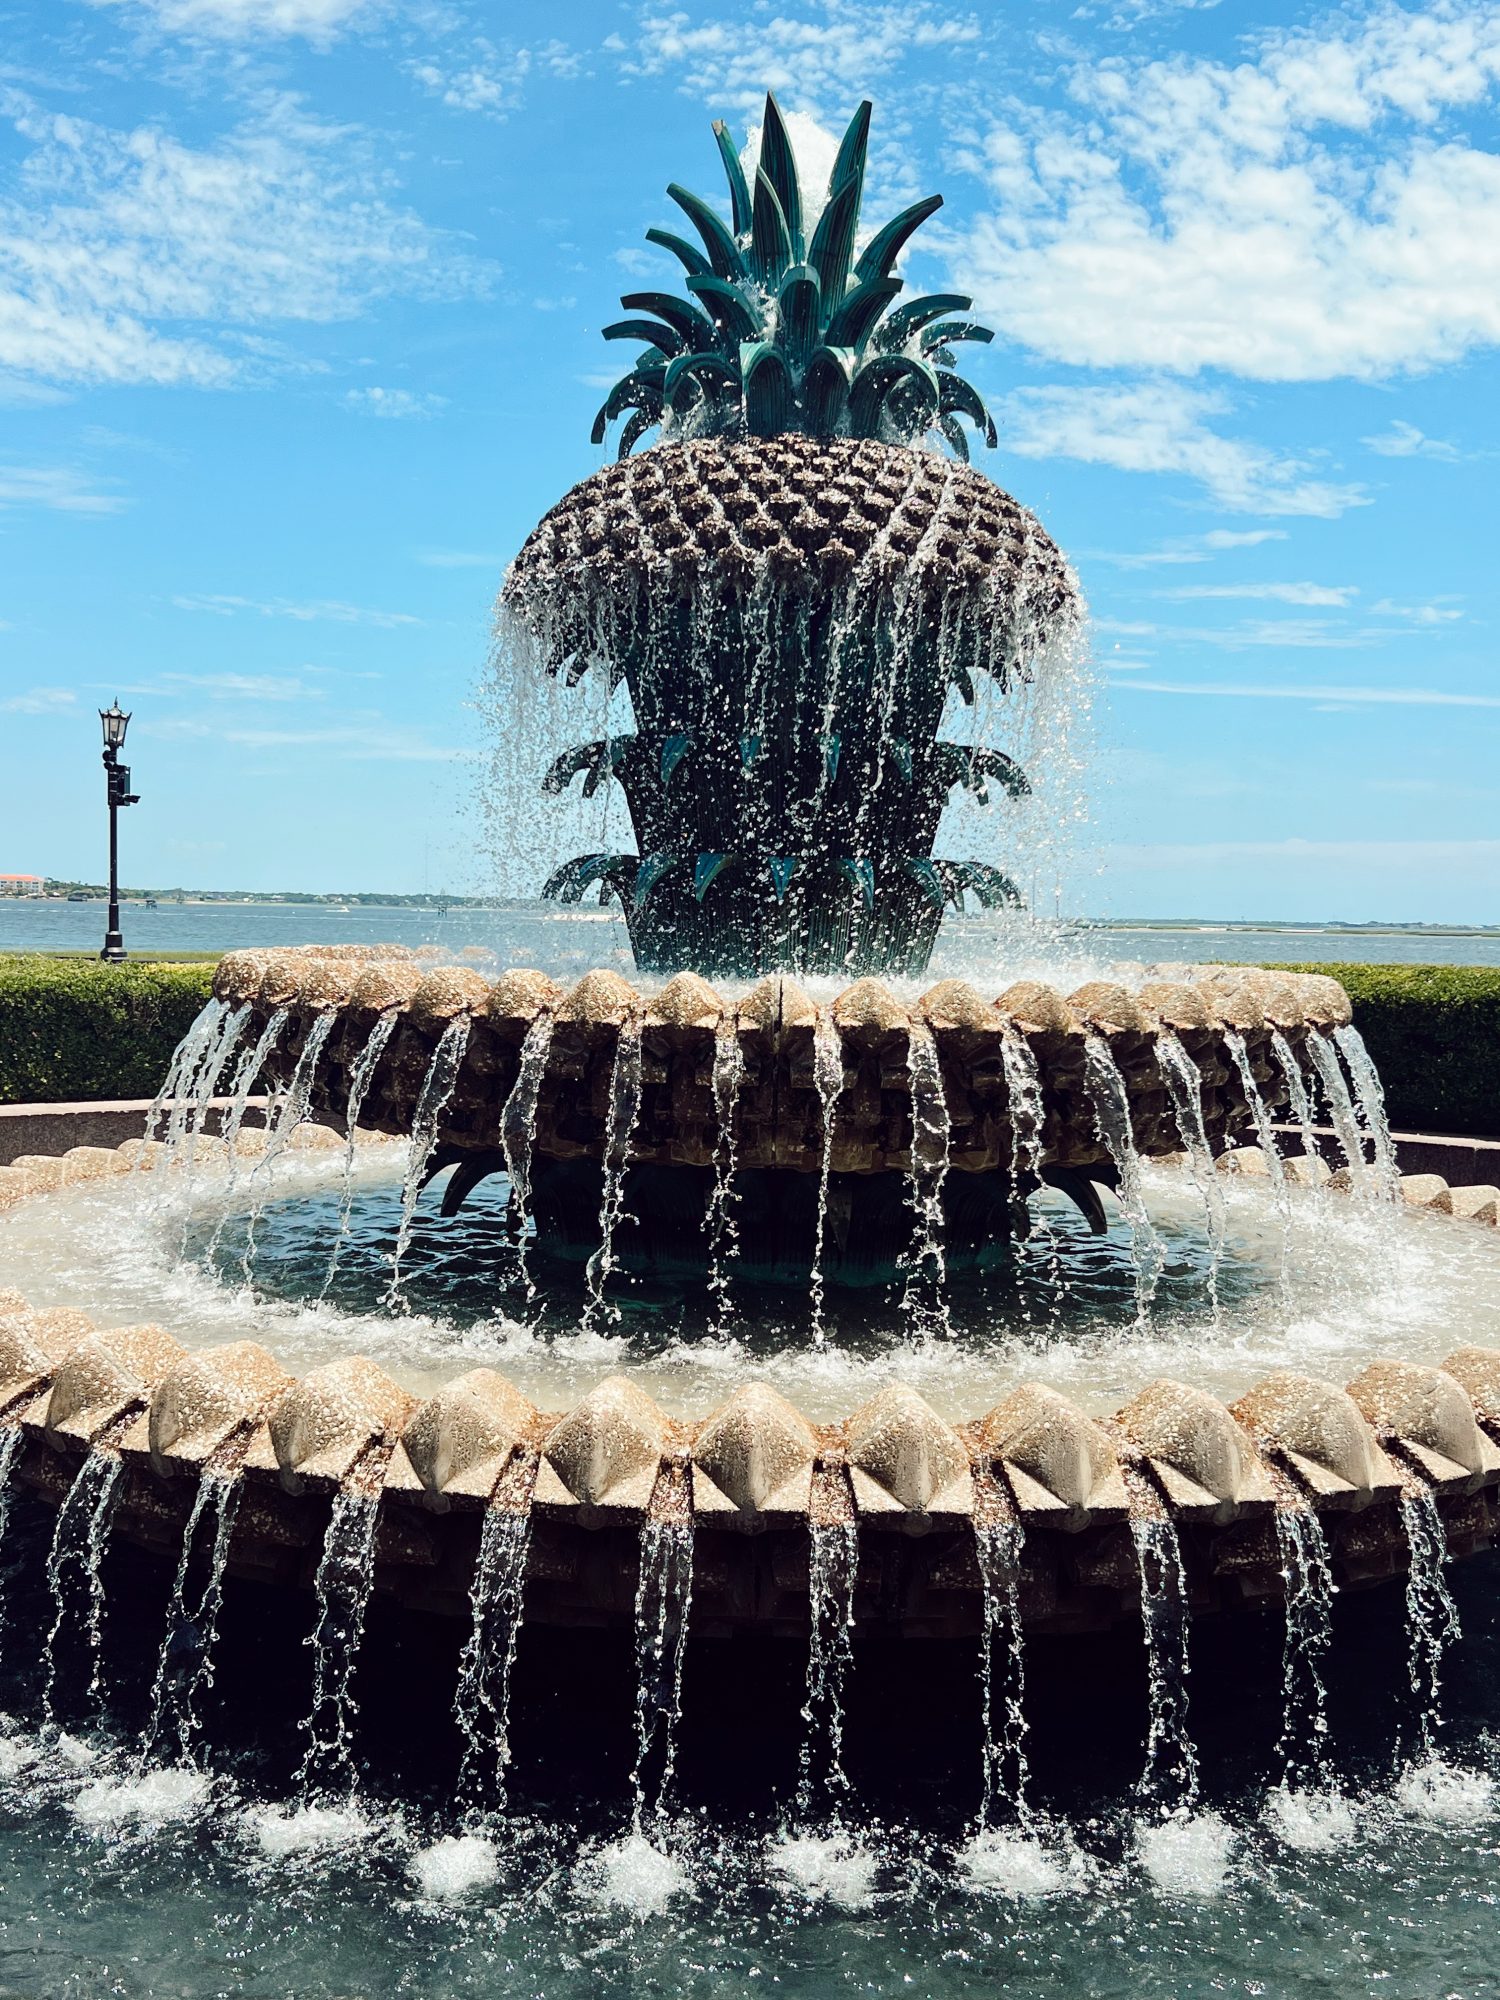 Pineapple water fountain in Waterfront Park.